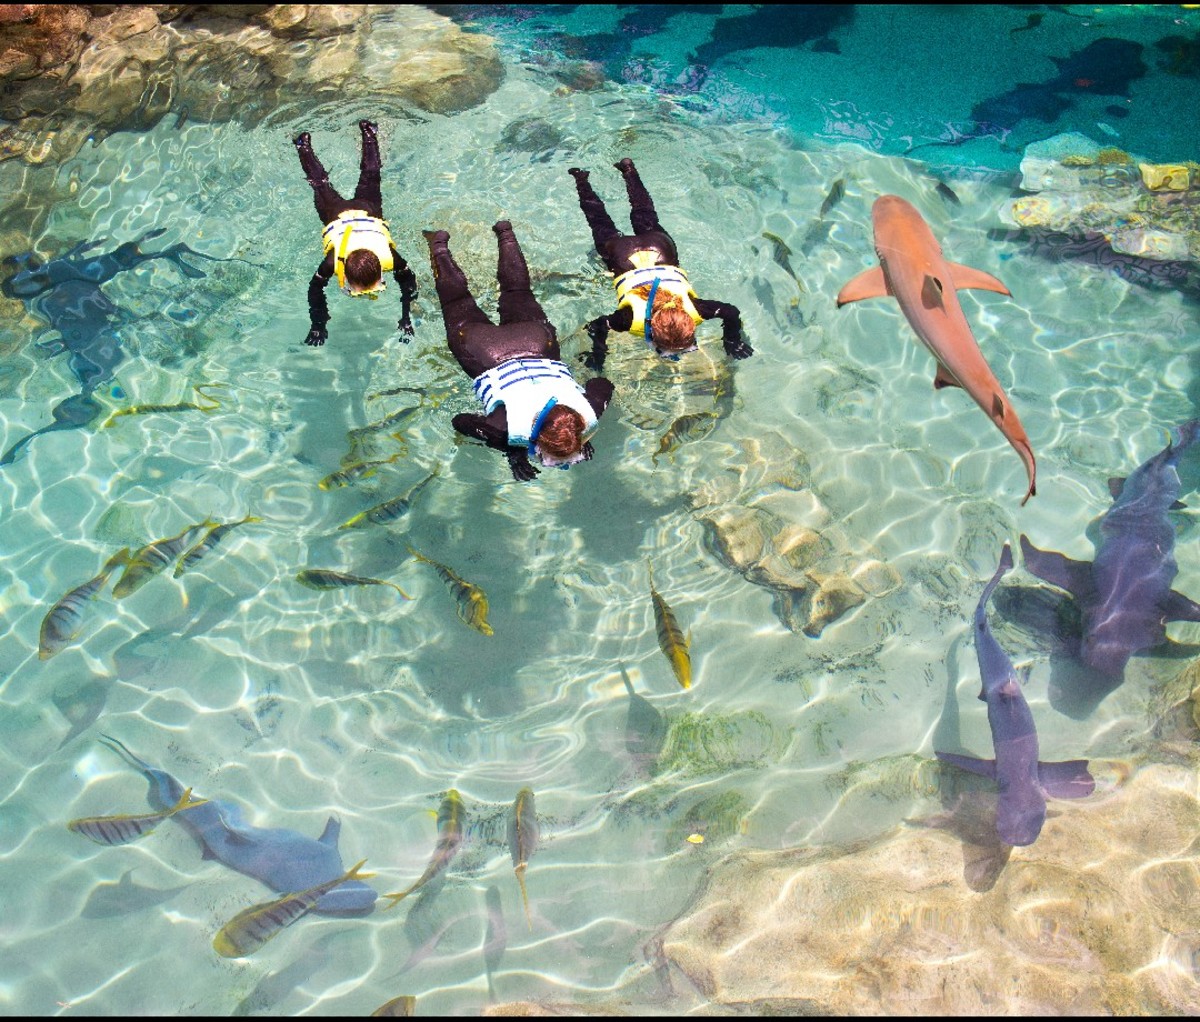 A family snorkeling next to small sharks.